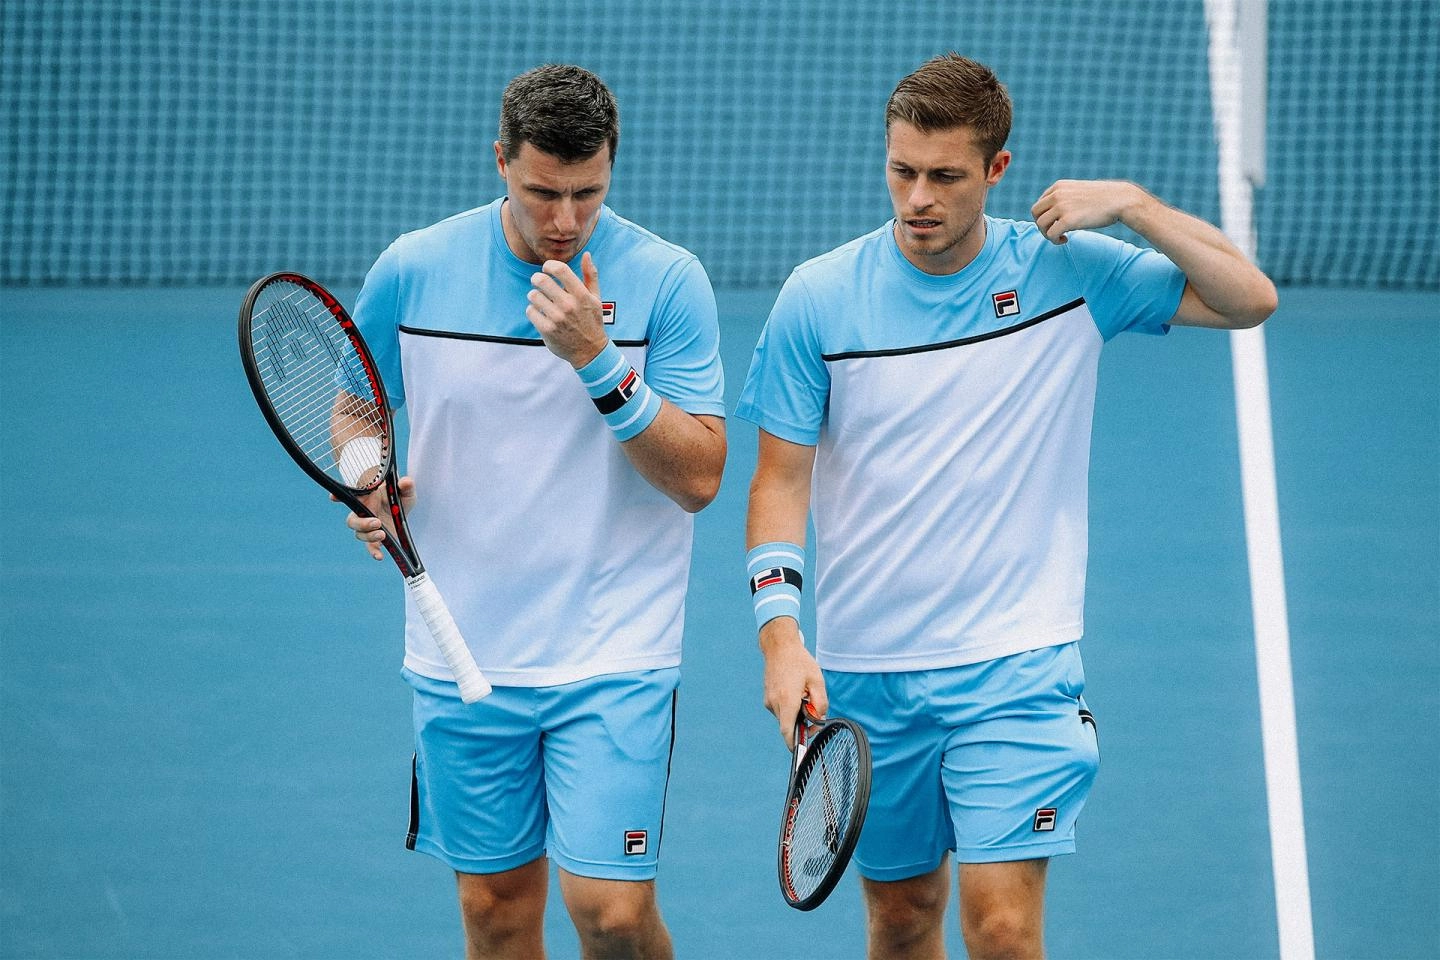 Neal and brother Ken at the 2019 Australian Open